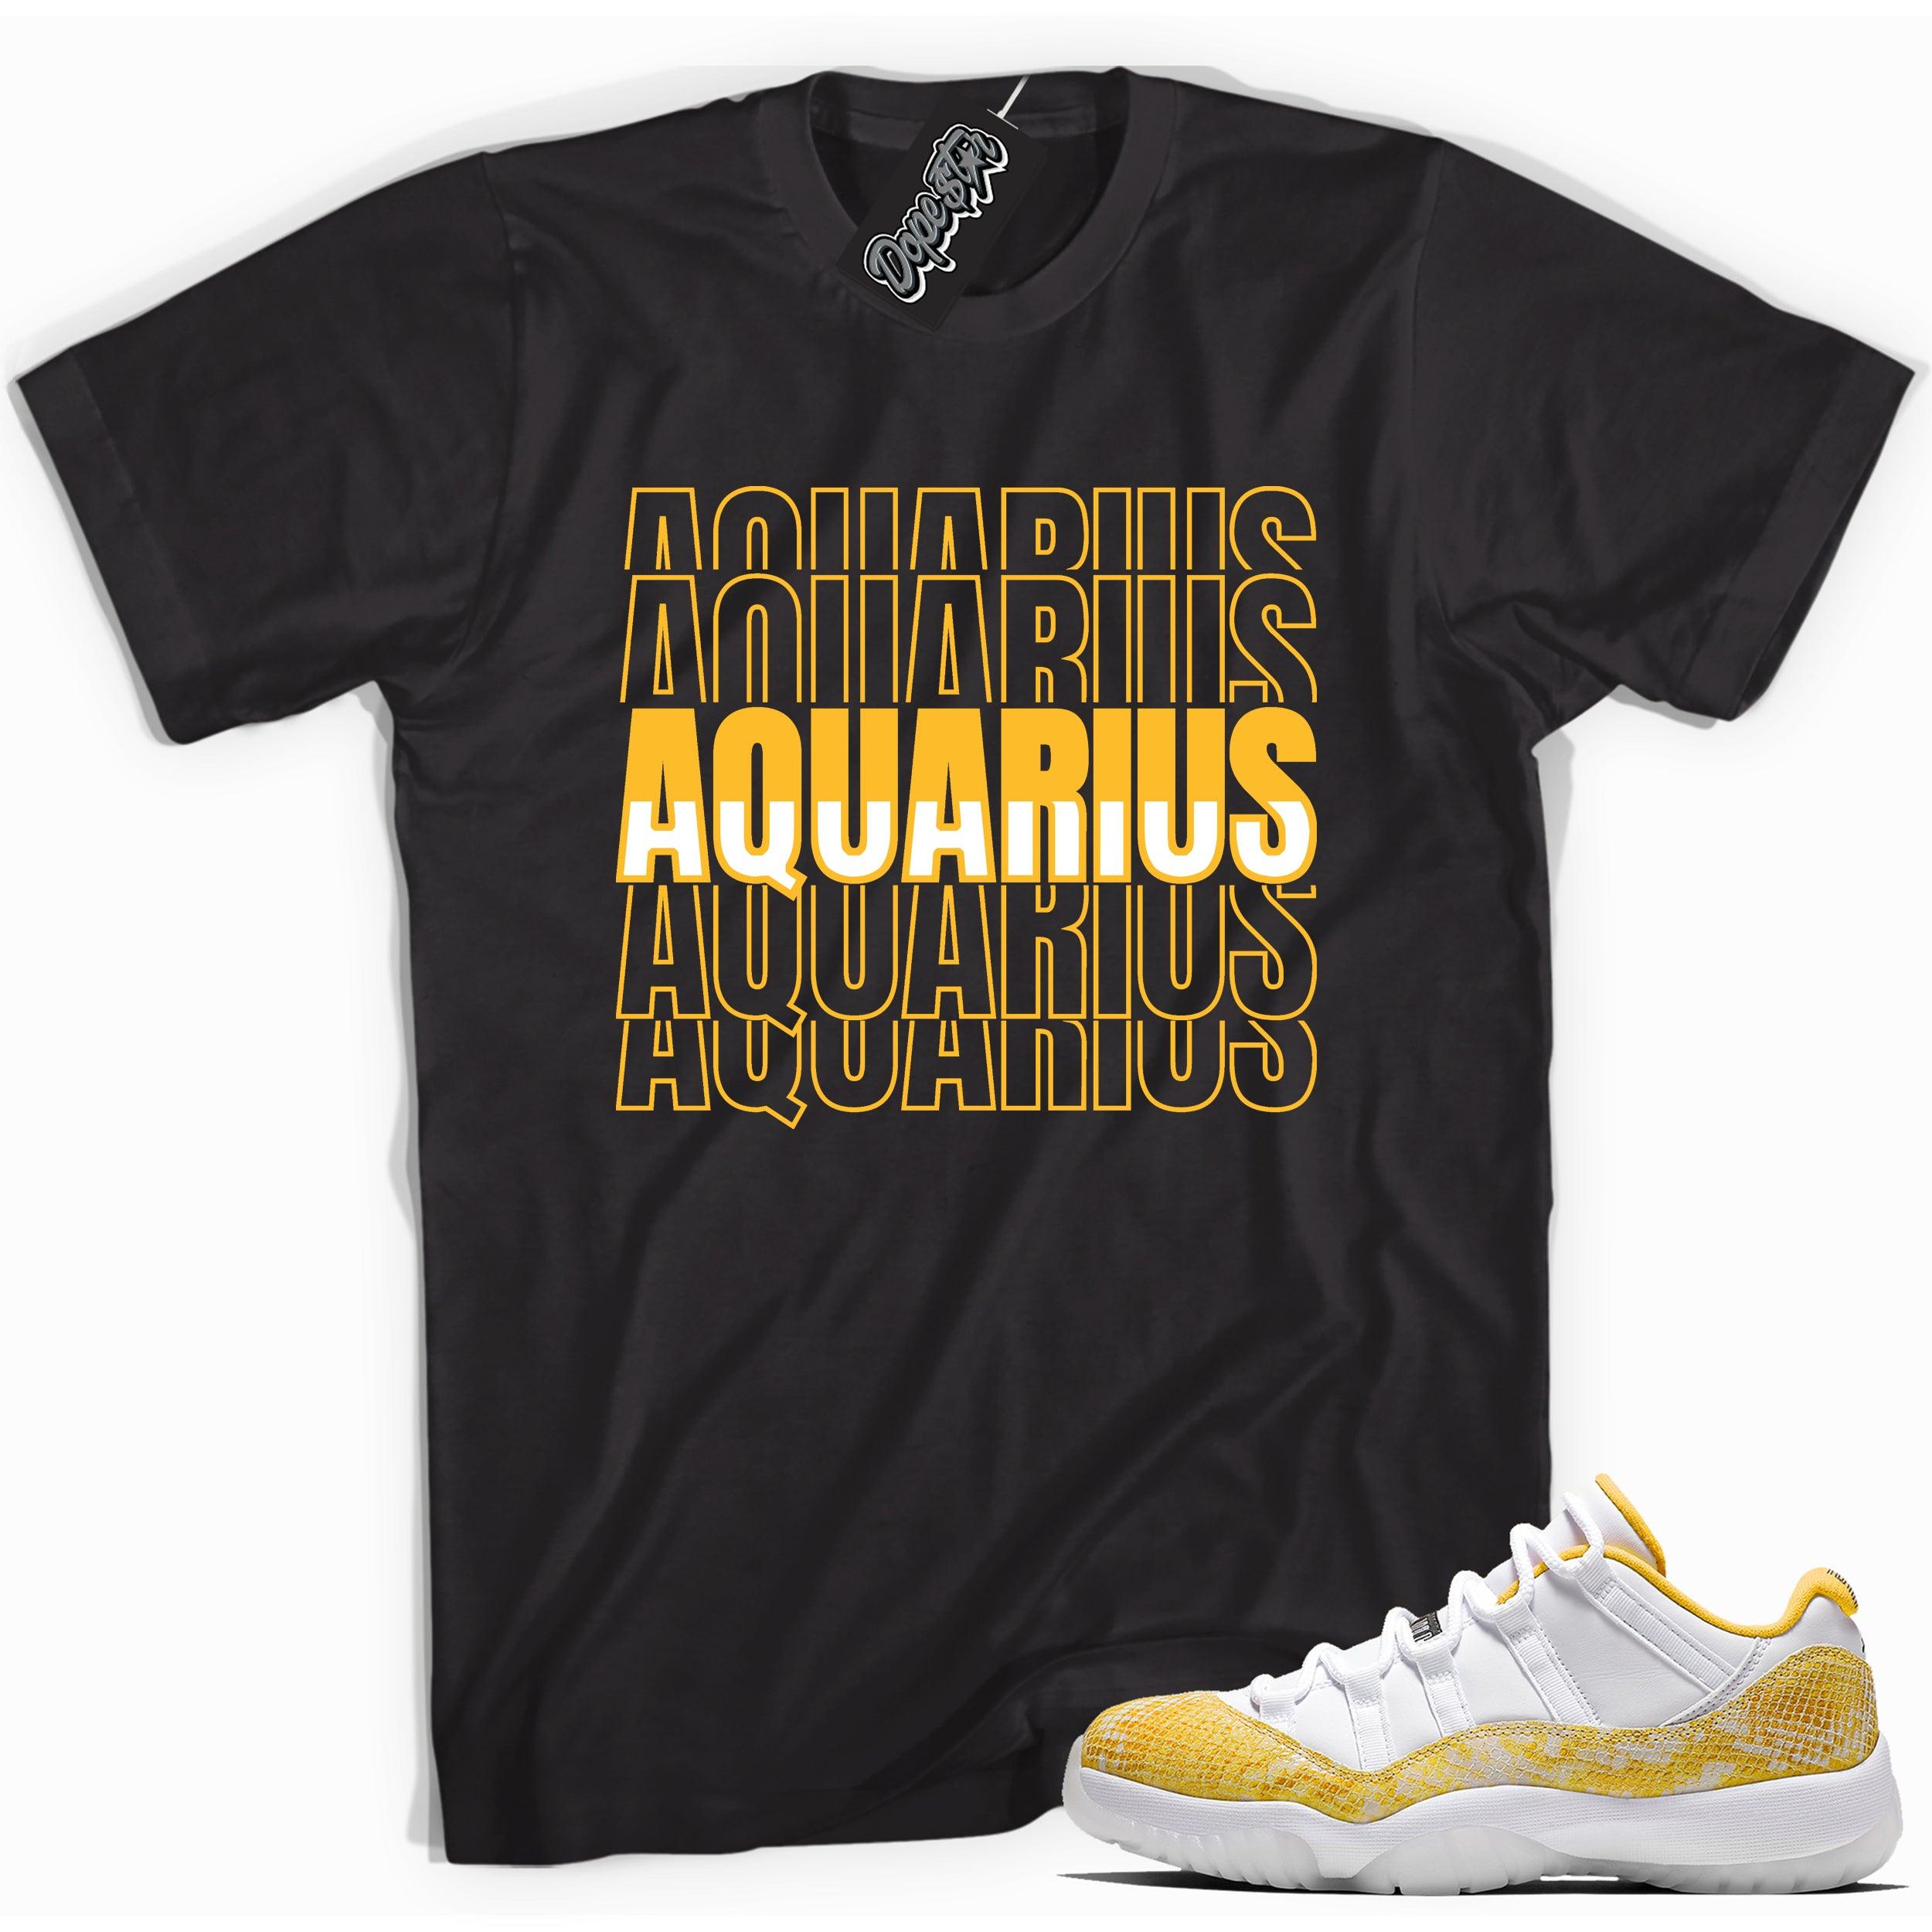 Cool black graphic tee with 'aquarius' print, that perfectly matches  Air Jordan 11 Retro Low Yellow Snakeskin sneakers